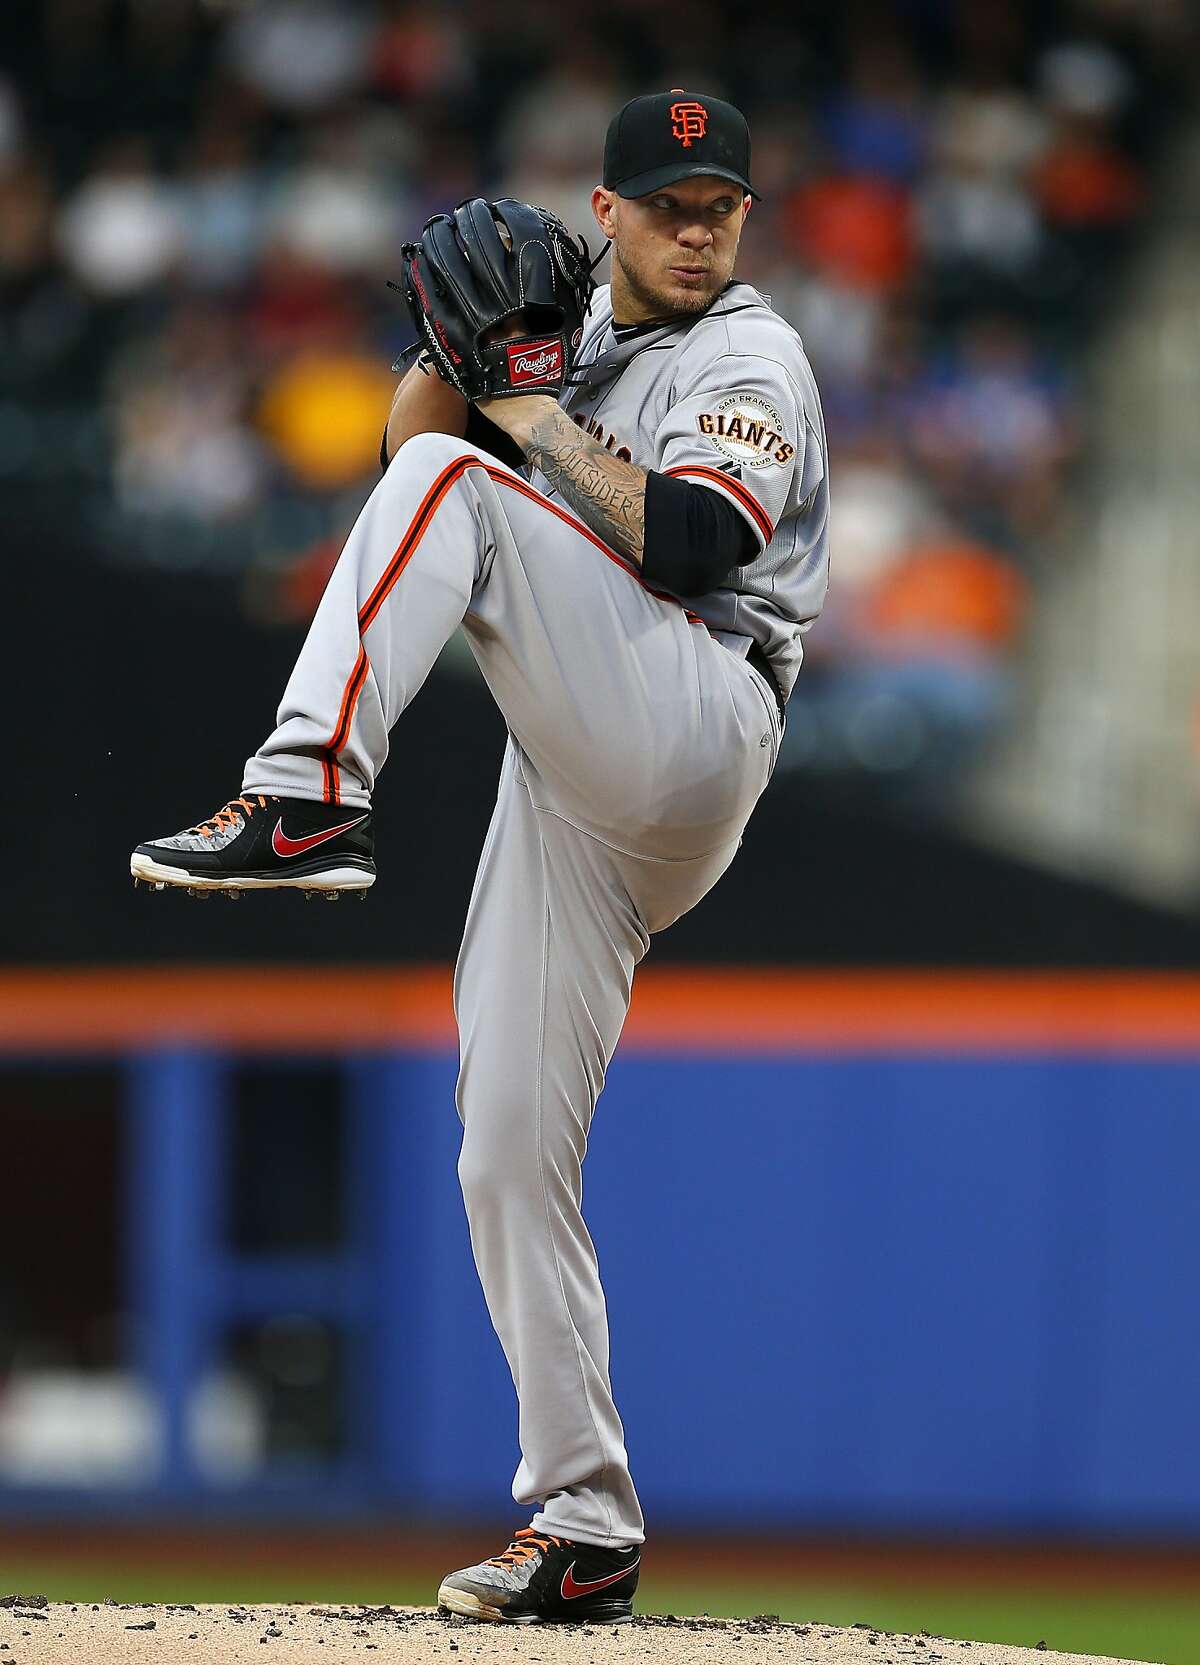 NEW YORK, NY - AUGUST 2: Jake Peavy #43 of the San Francisco Giants delivers a pitch against the New York Mets in the first inning on August 2, 2014 at Citi Field in the Flushing neighborhood of the Queens borough of New York City. (Photo by Rich Schultz/Getty Images)